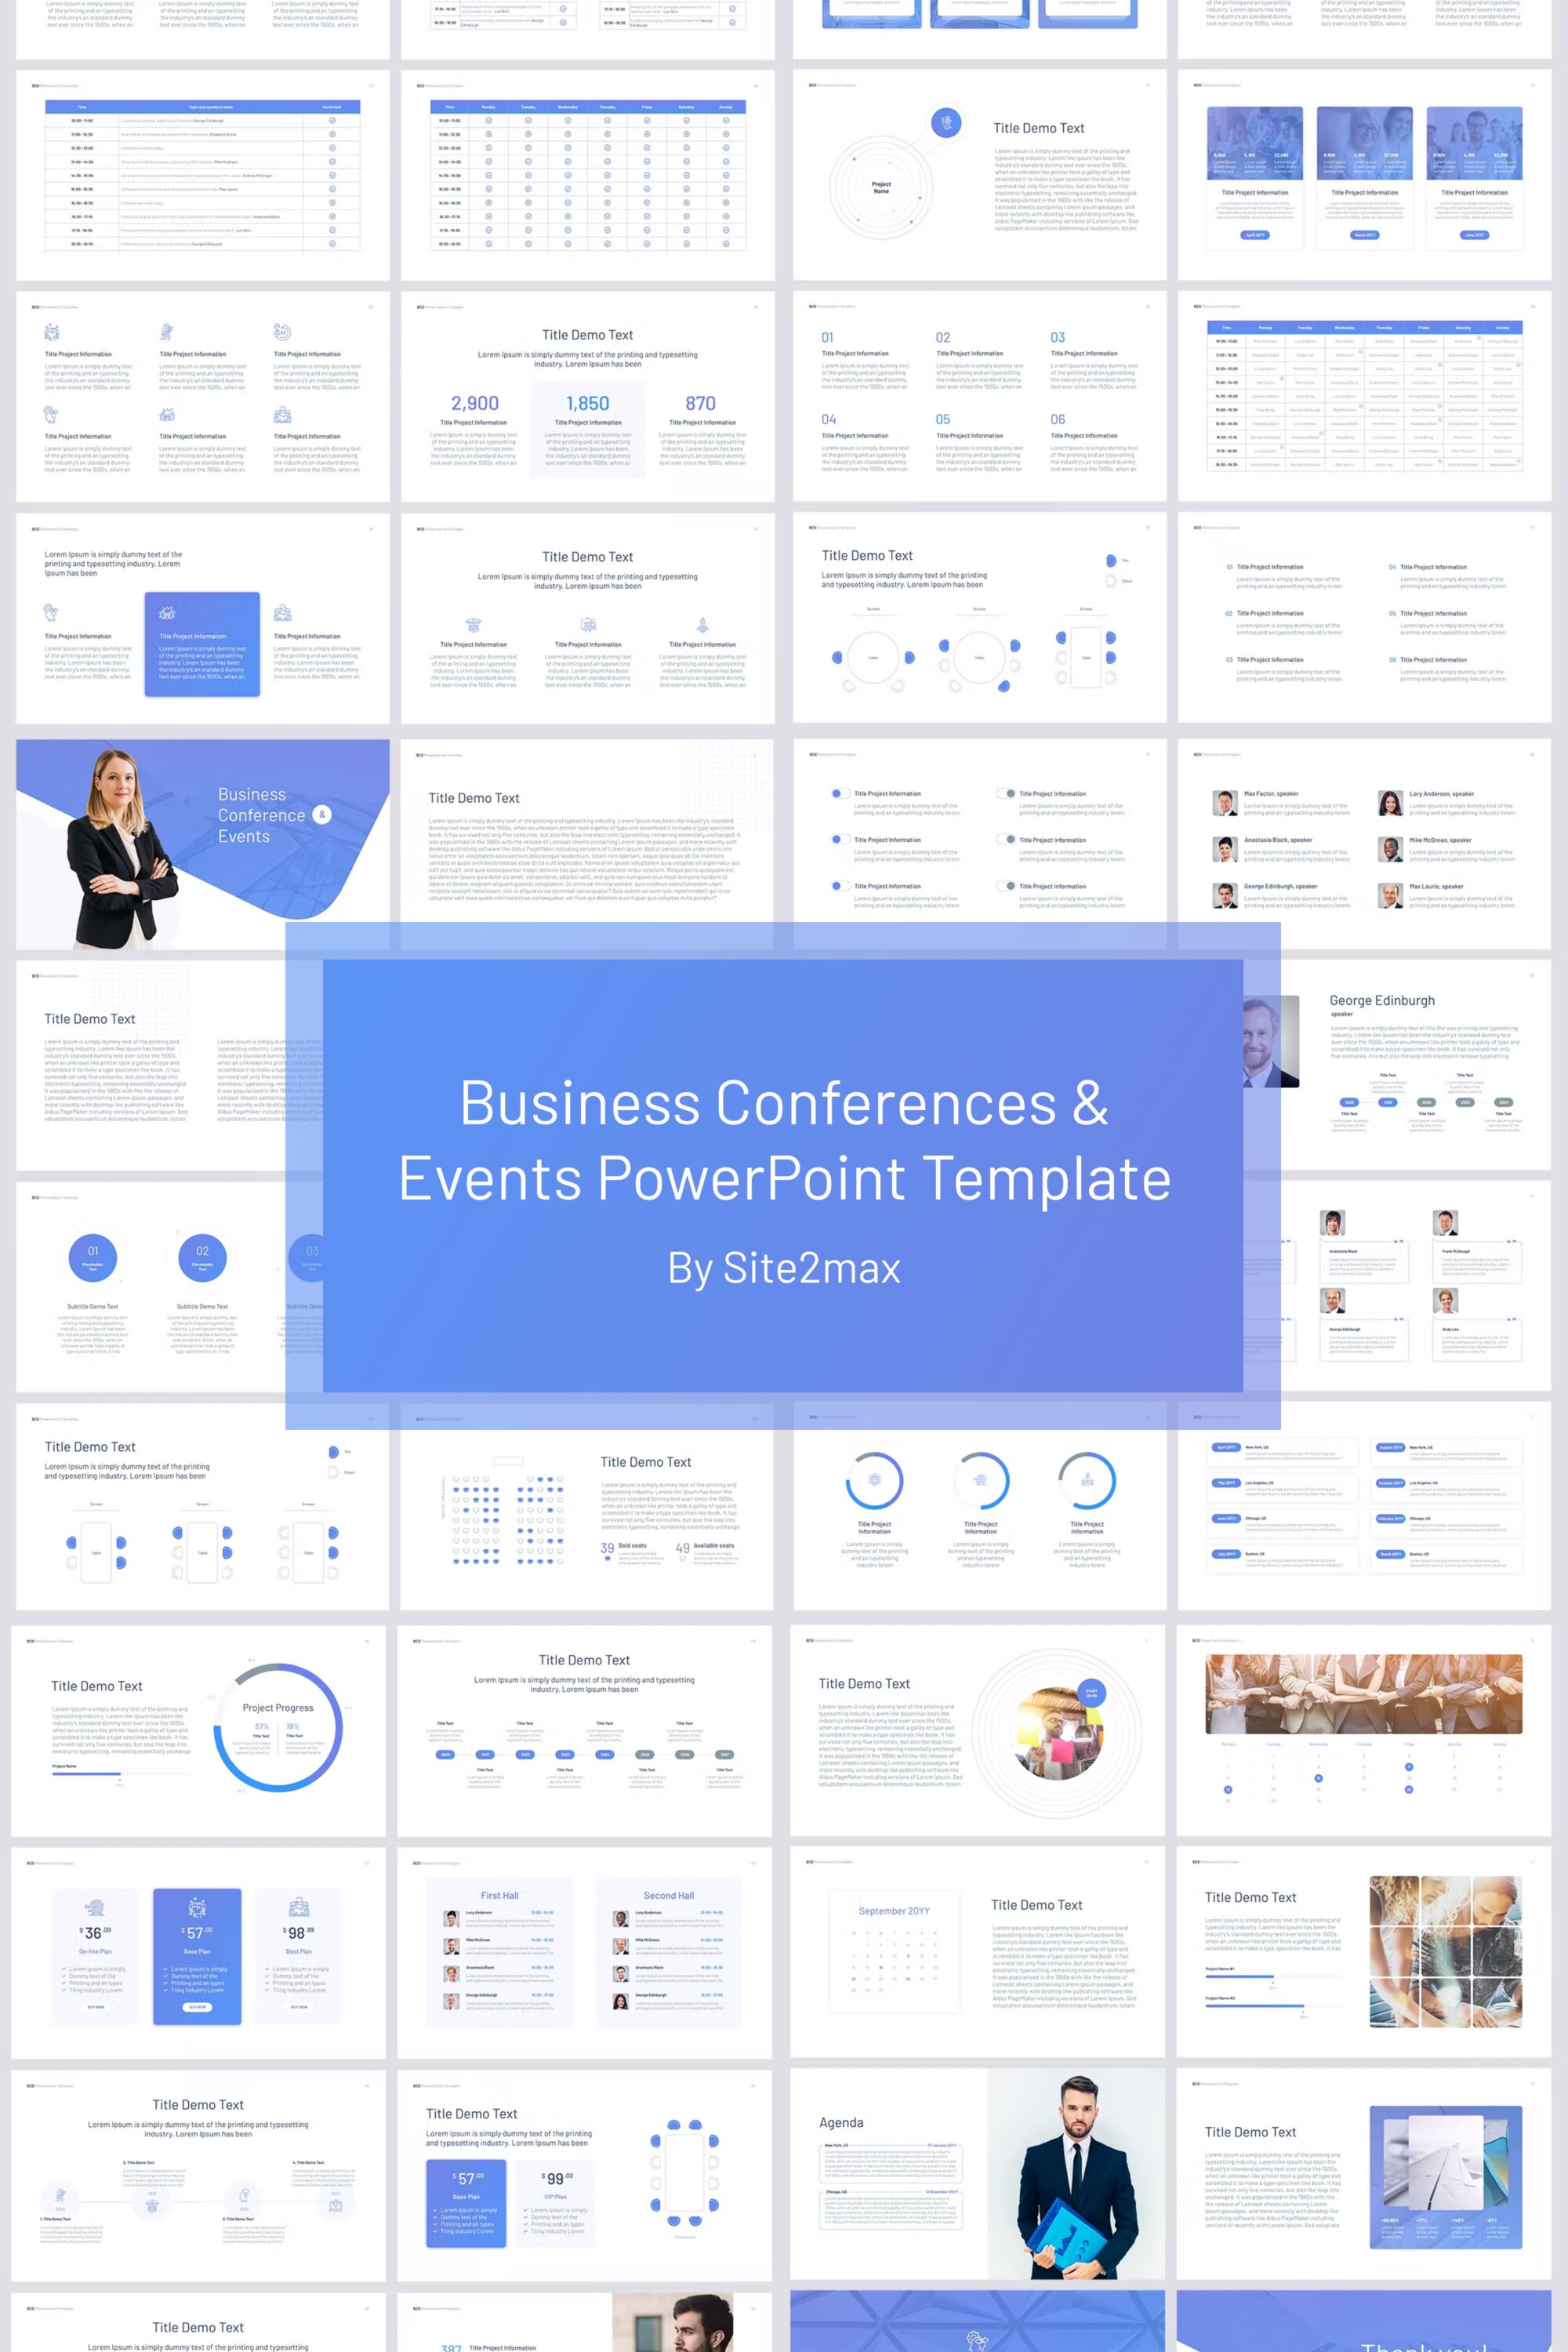 Business conferences events powerpoint template images of pinterest.